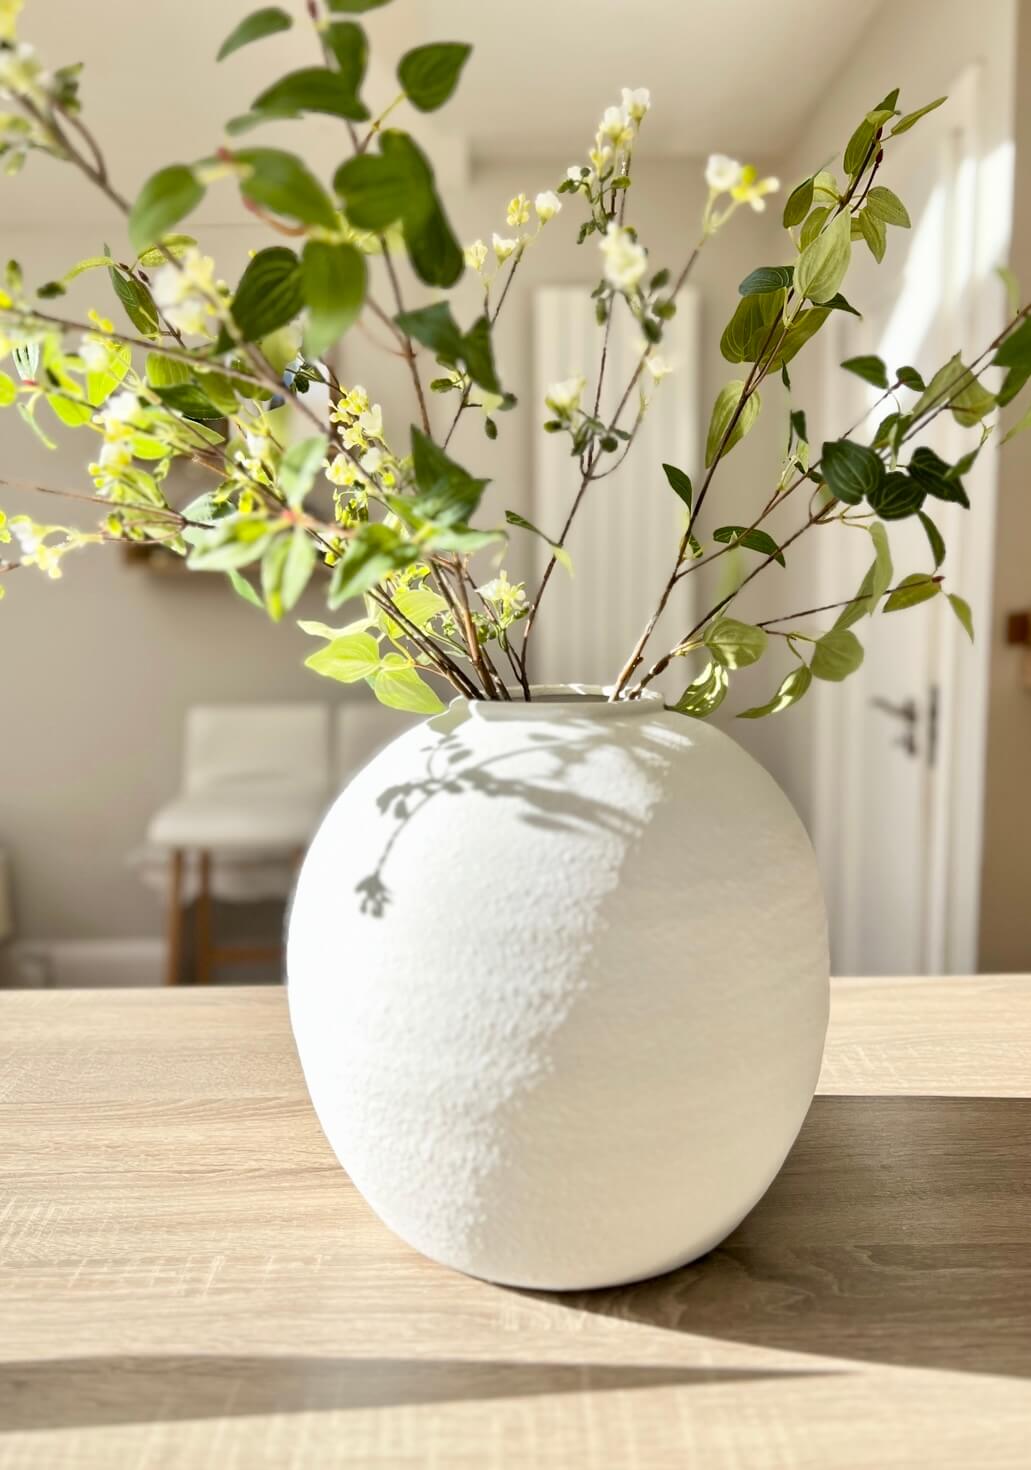 Stems of green foliage in white vase on lifestyle background